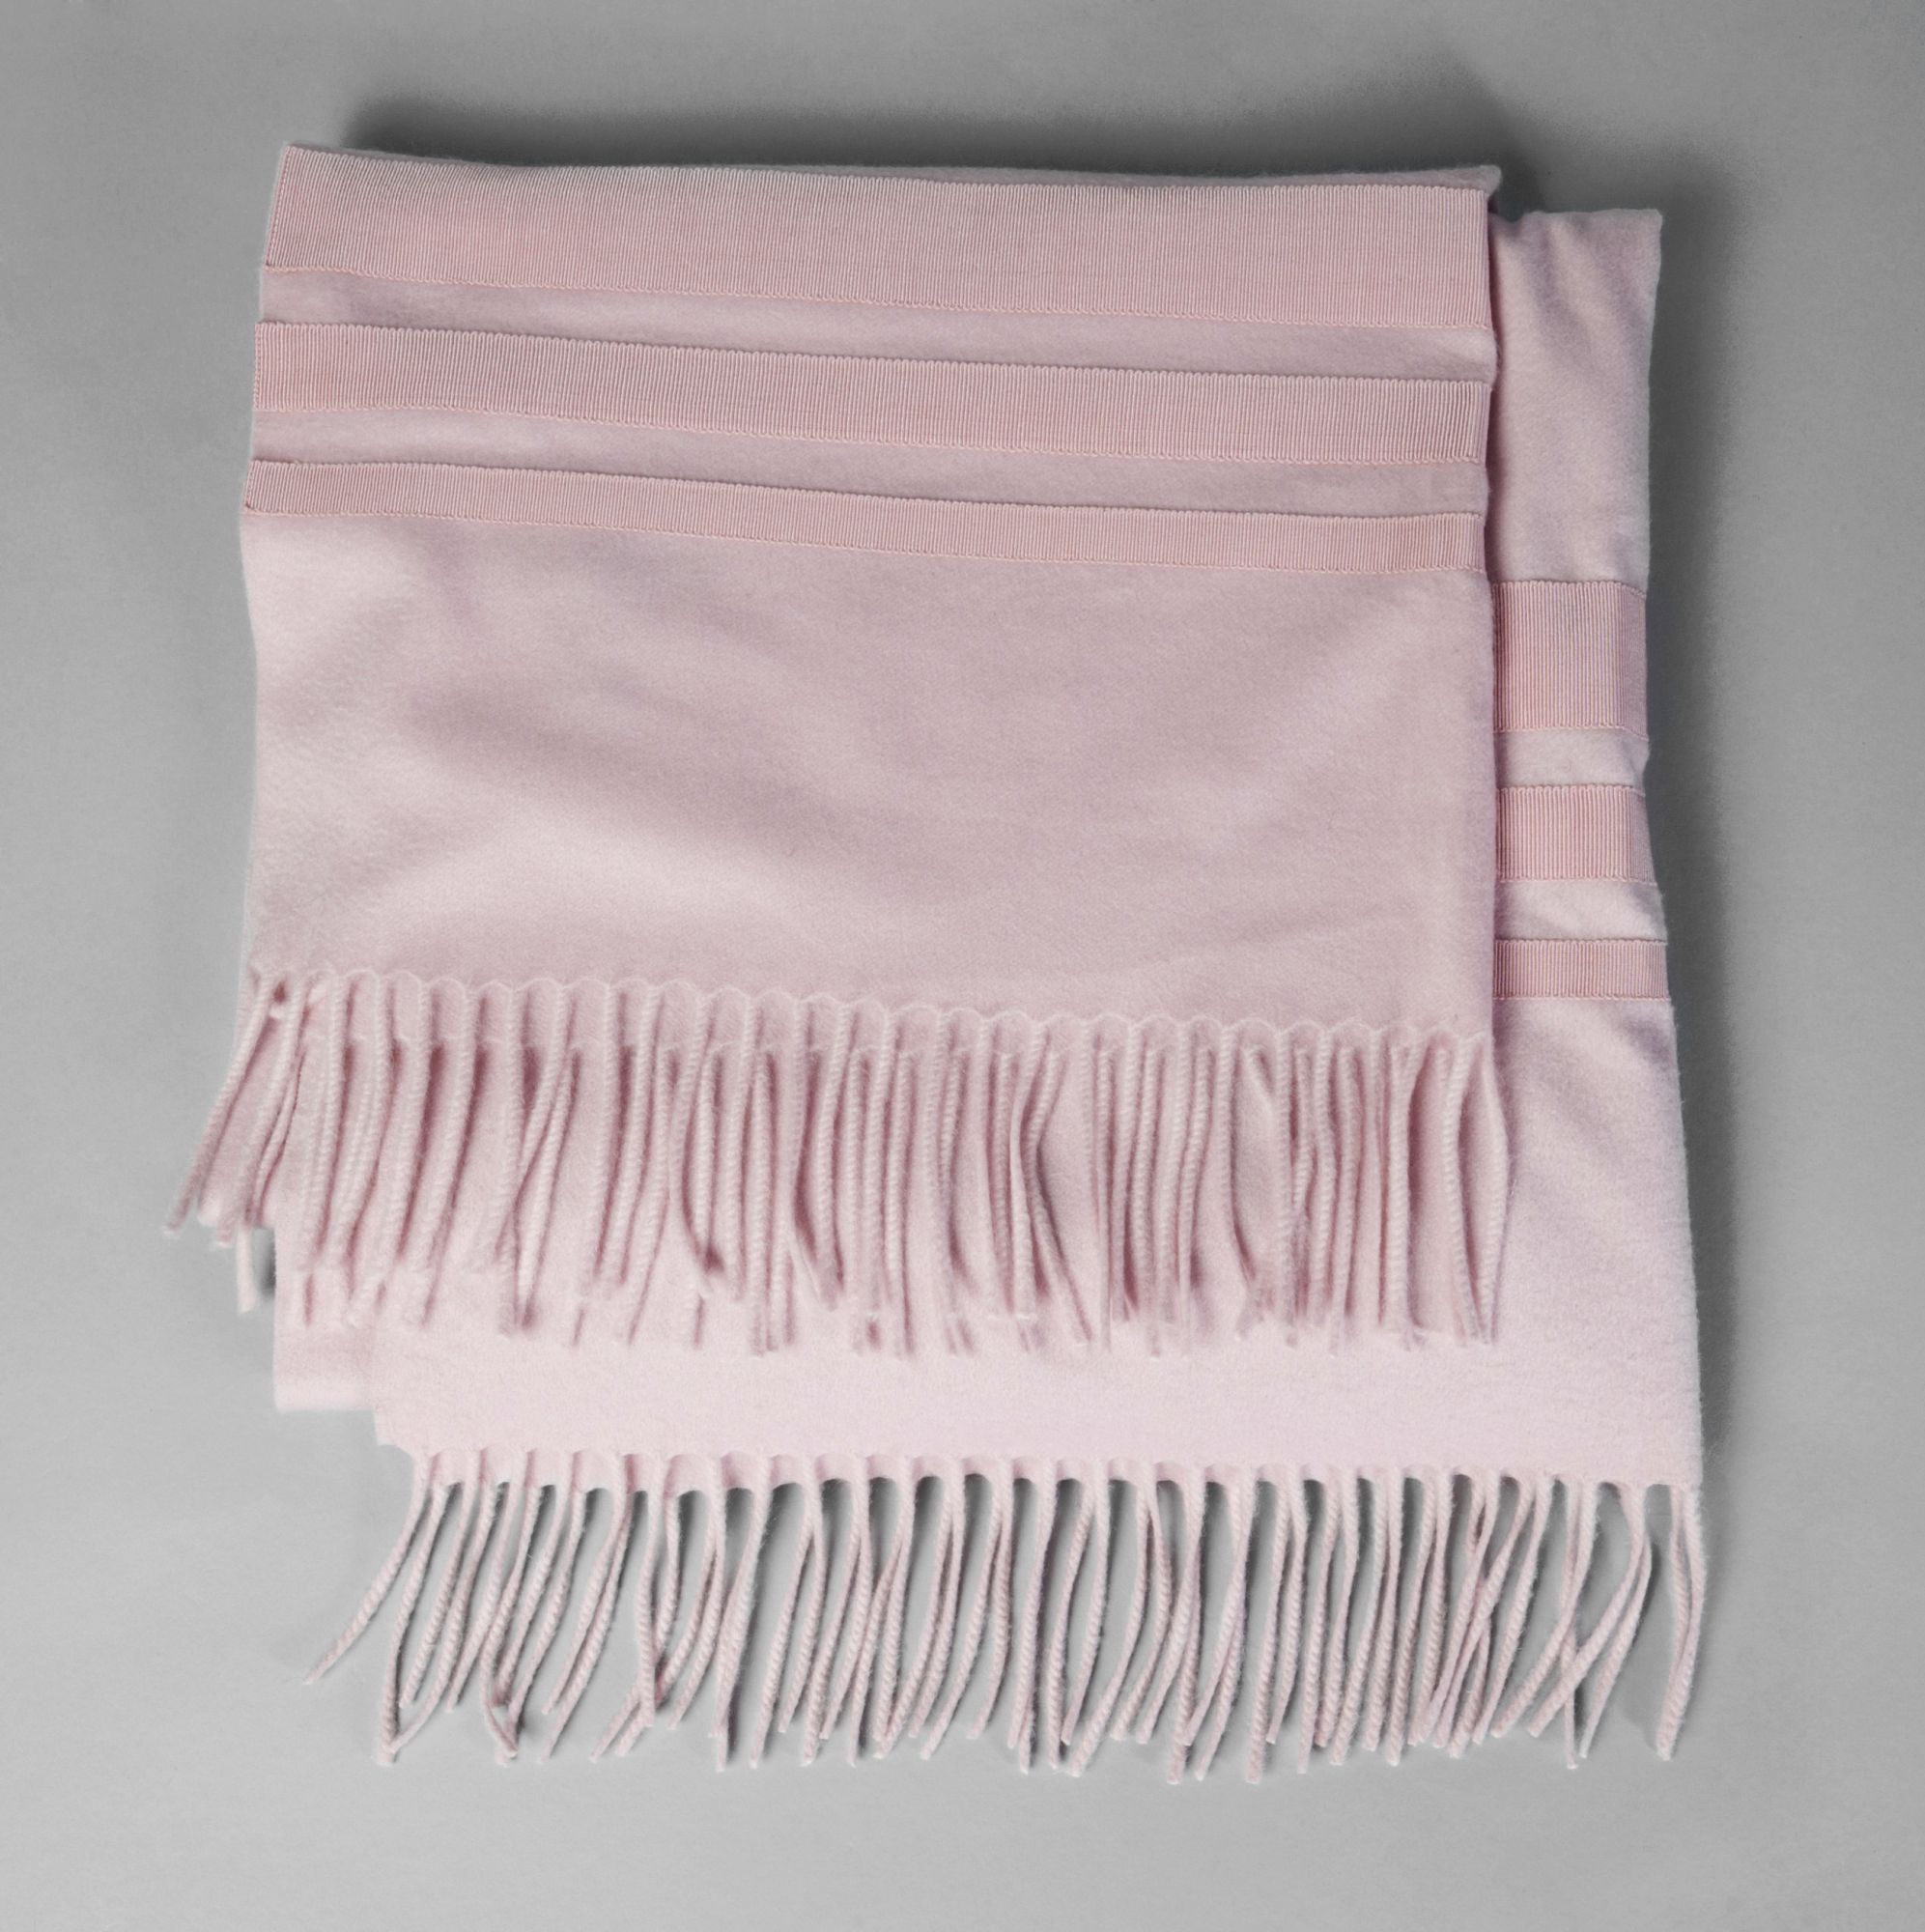 A Salvatore Ferragamo dusky pink cashmere shawl, with satin braid bands to both ends, 245cm x 68cm,